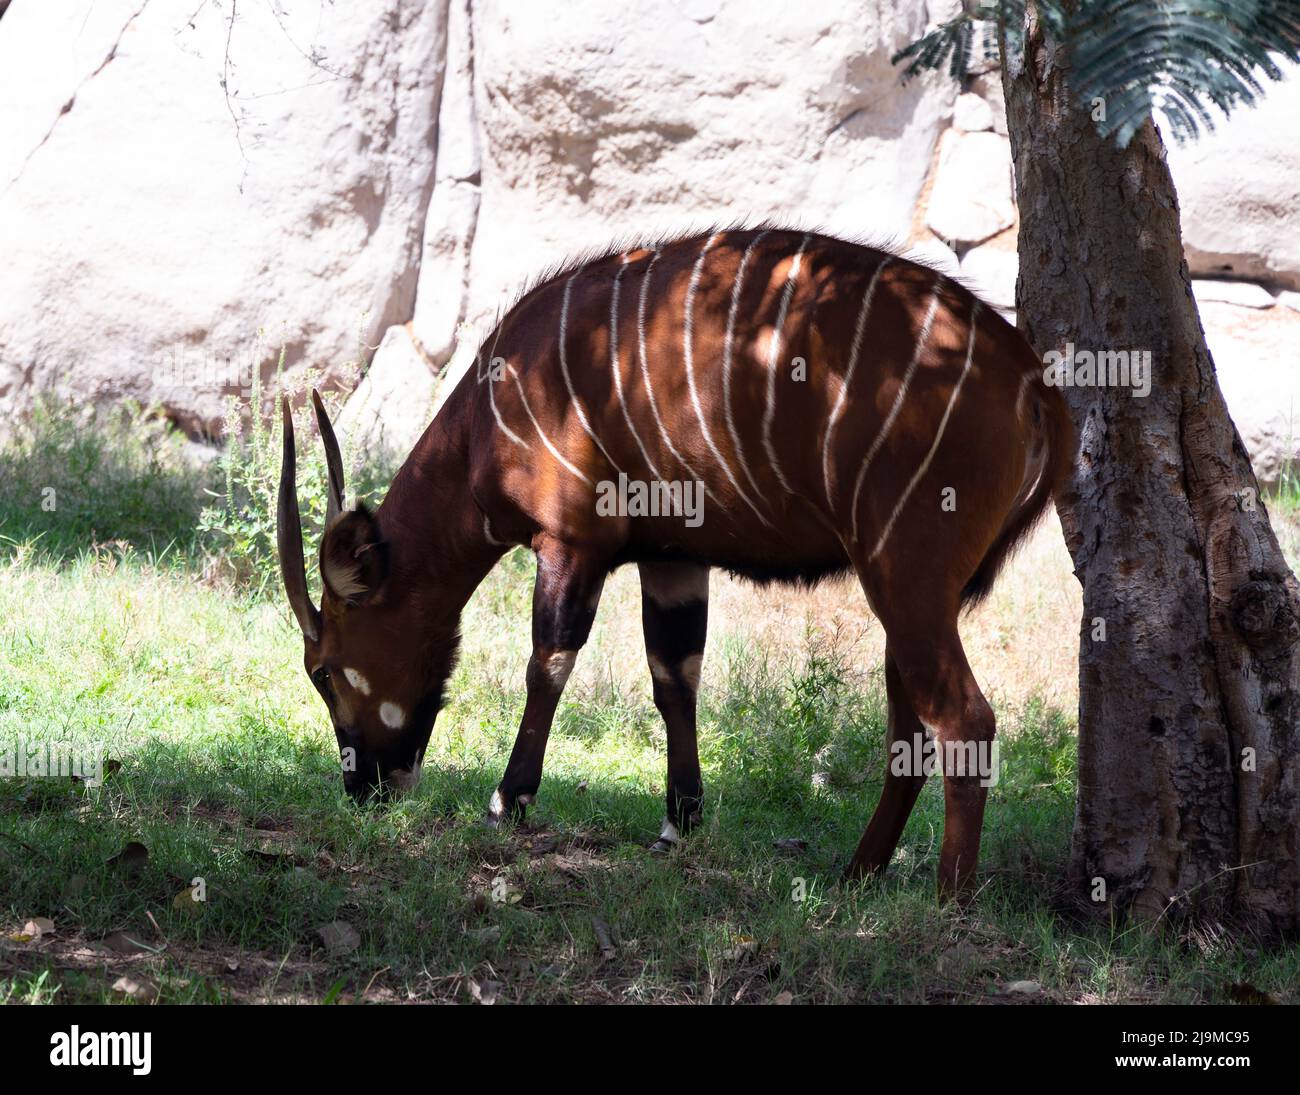 Beautiful and rare African Bongo captured at Dubai Safari Park zoological garden, a home to the most diverse array of animals in Dubai, UAE. Stock Photo